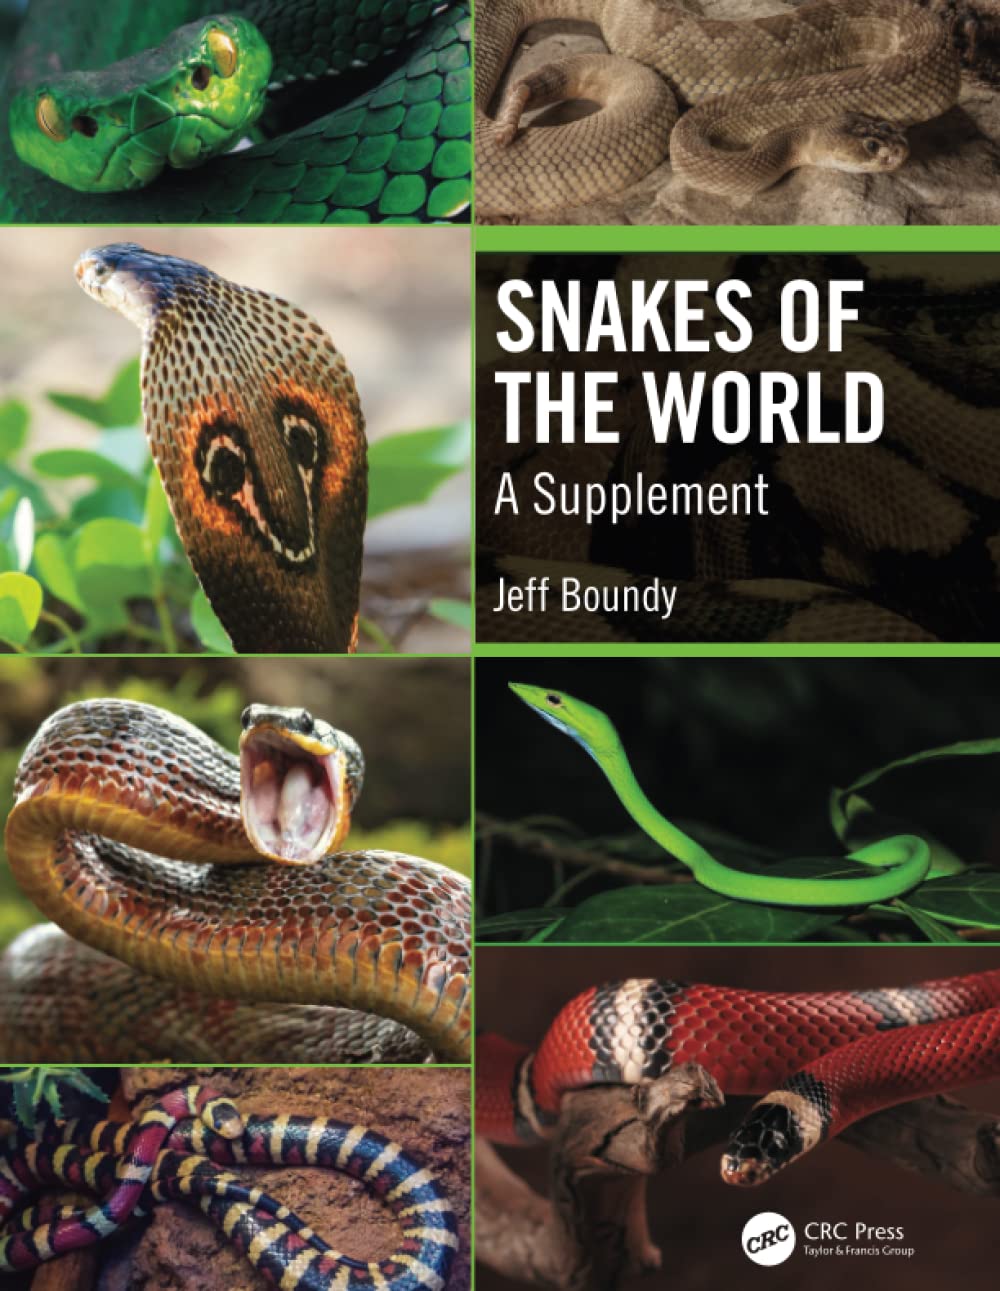 Book Snakes of the World Jeff Boundy